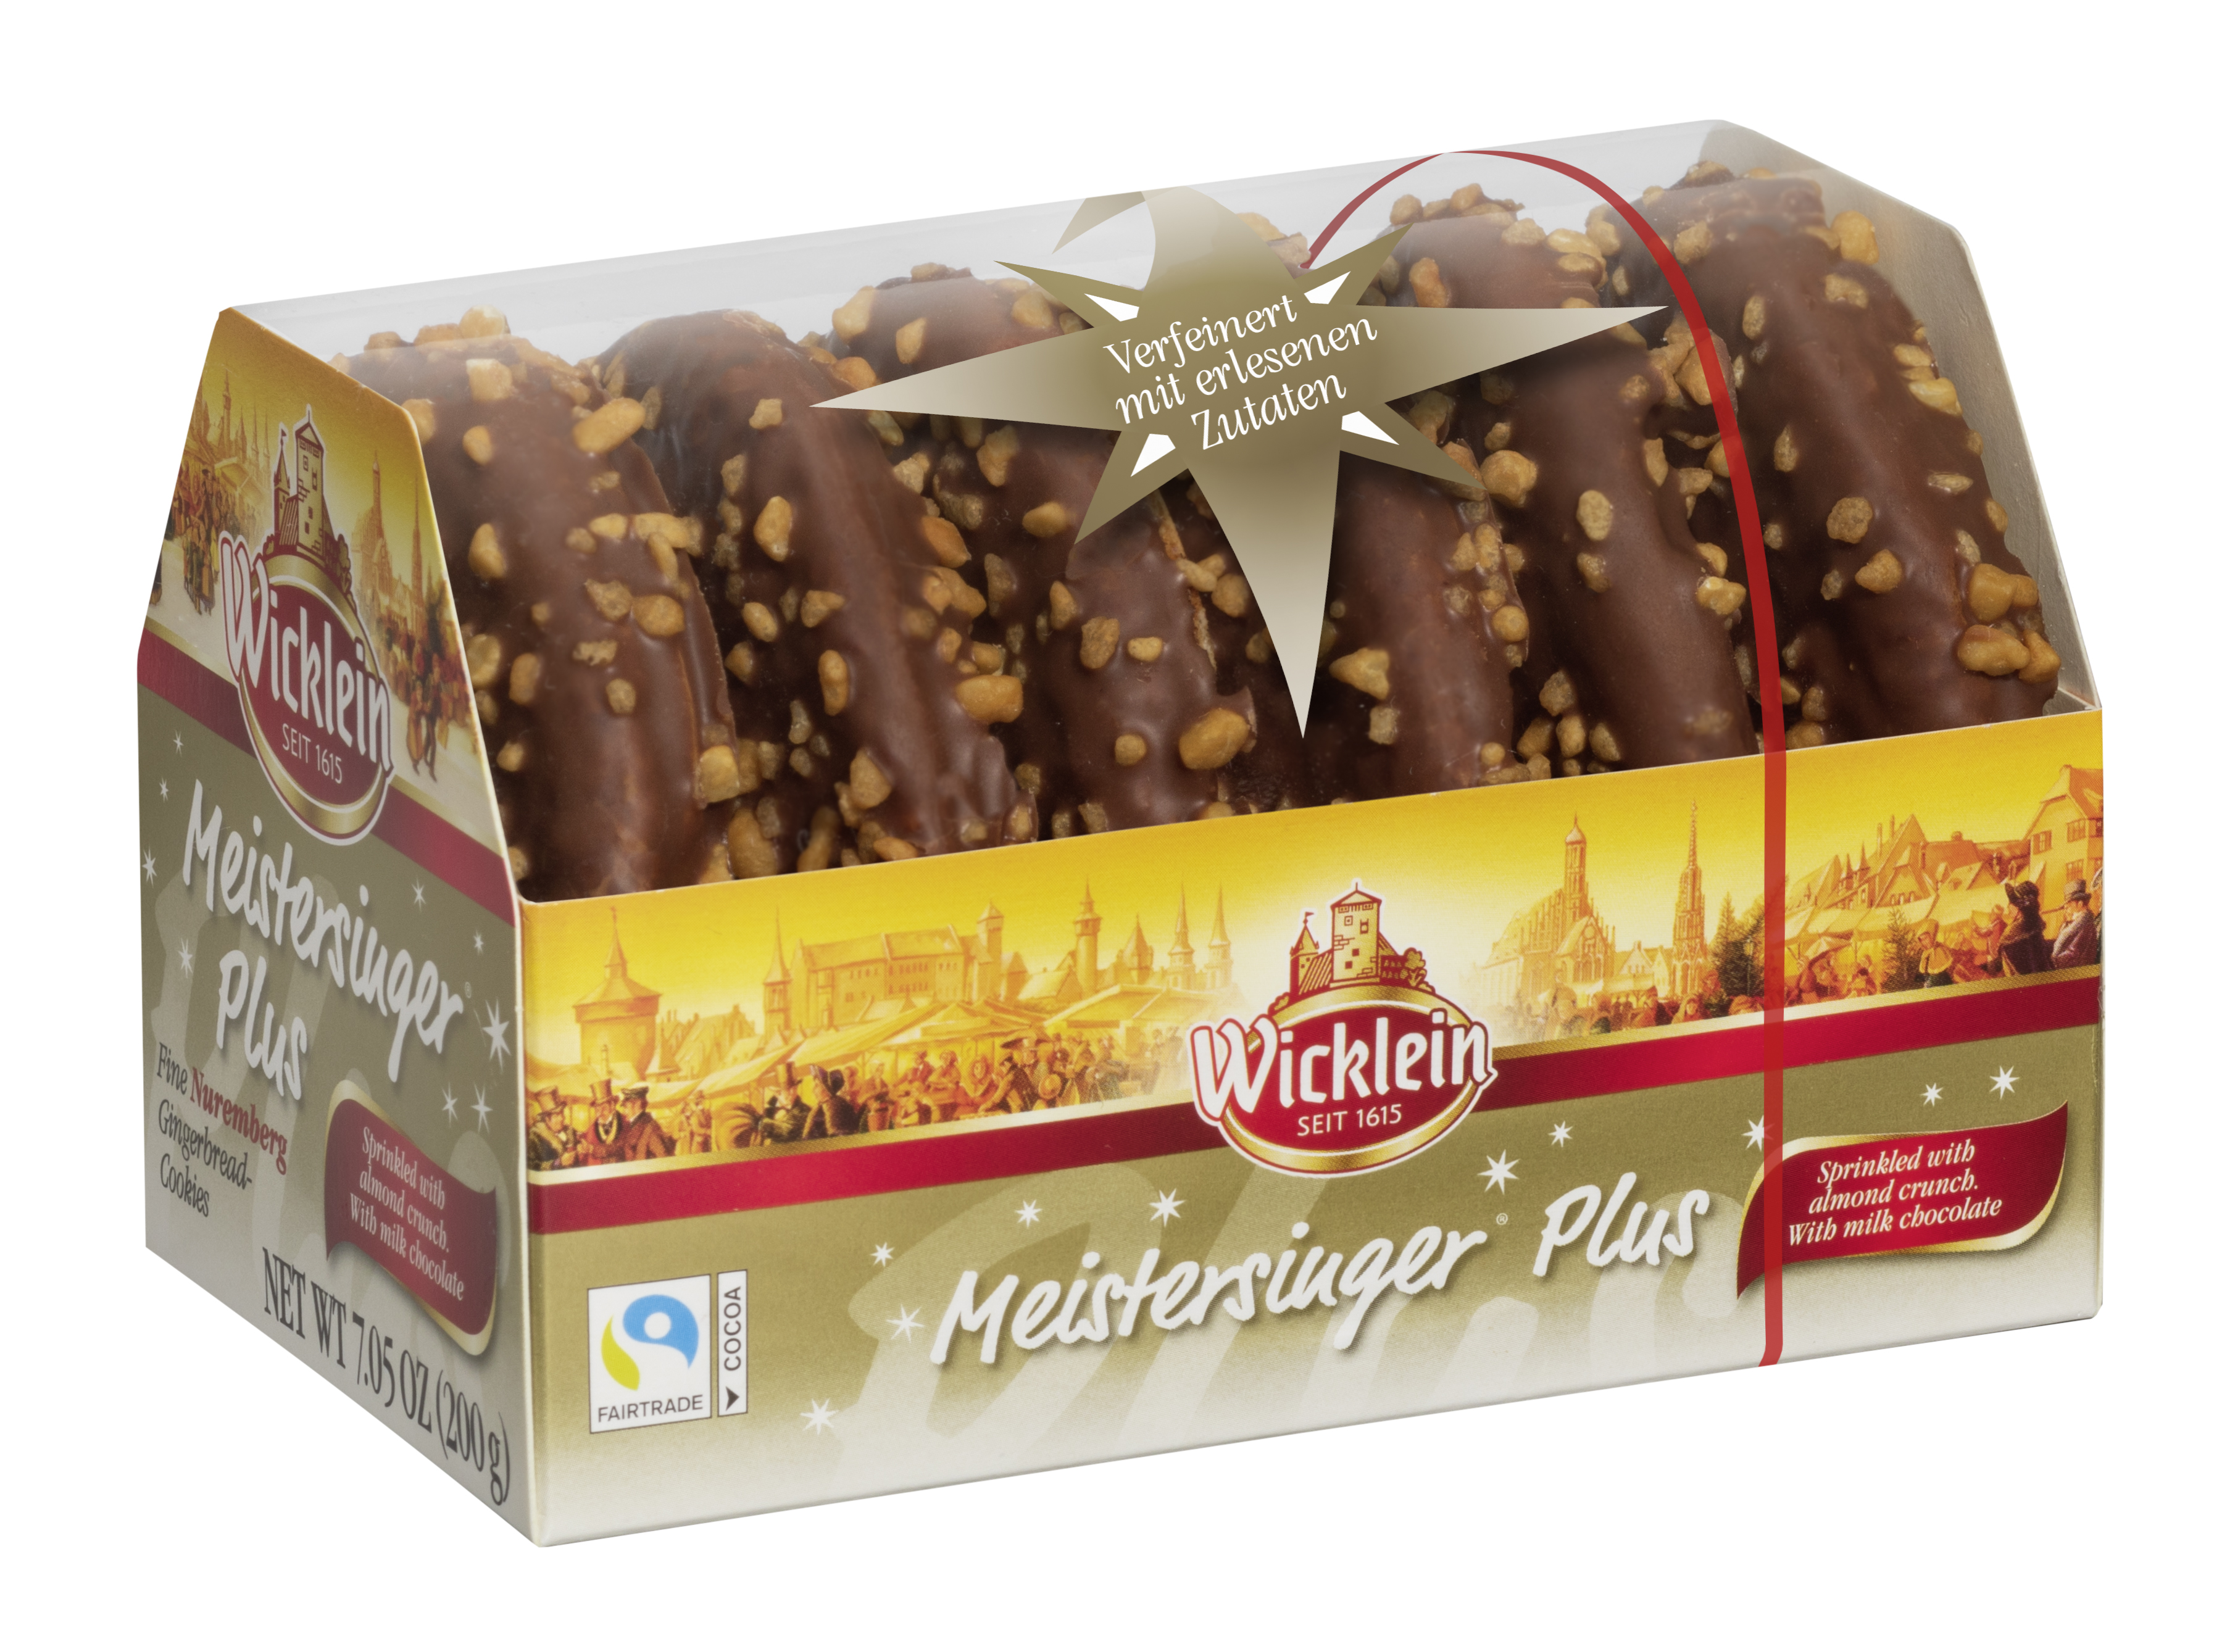 Meistersinger Plus with cashew-cocoa-brittle